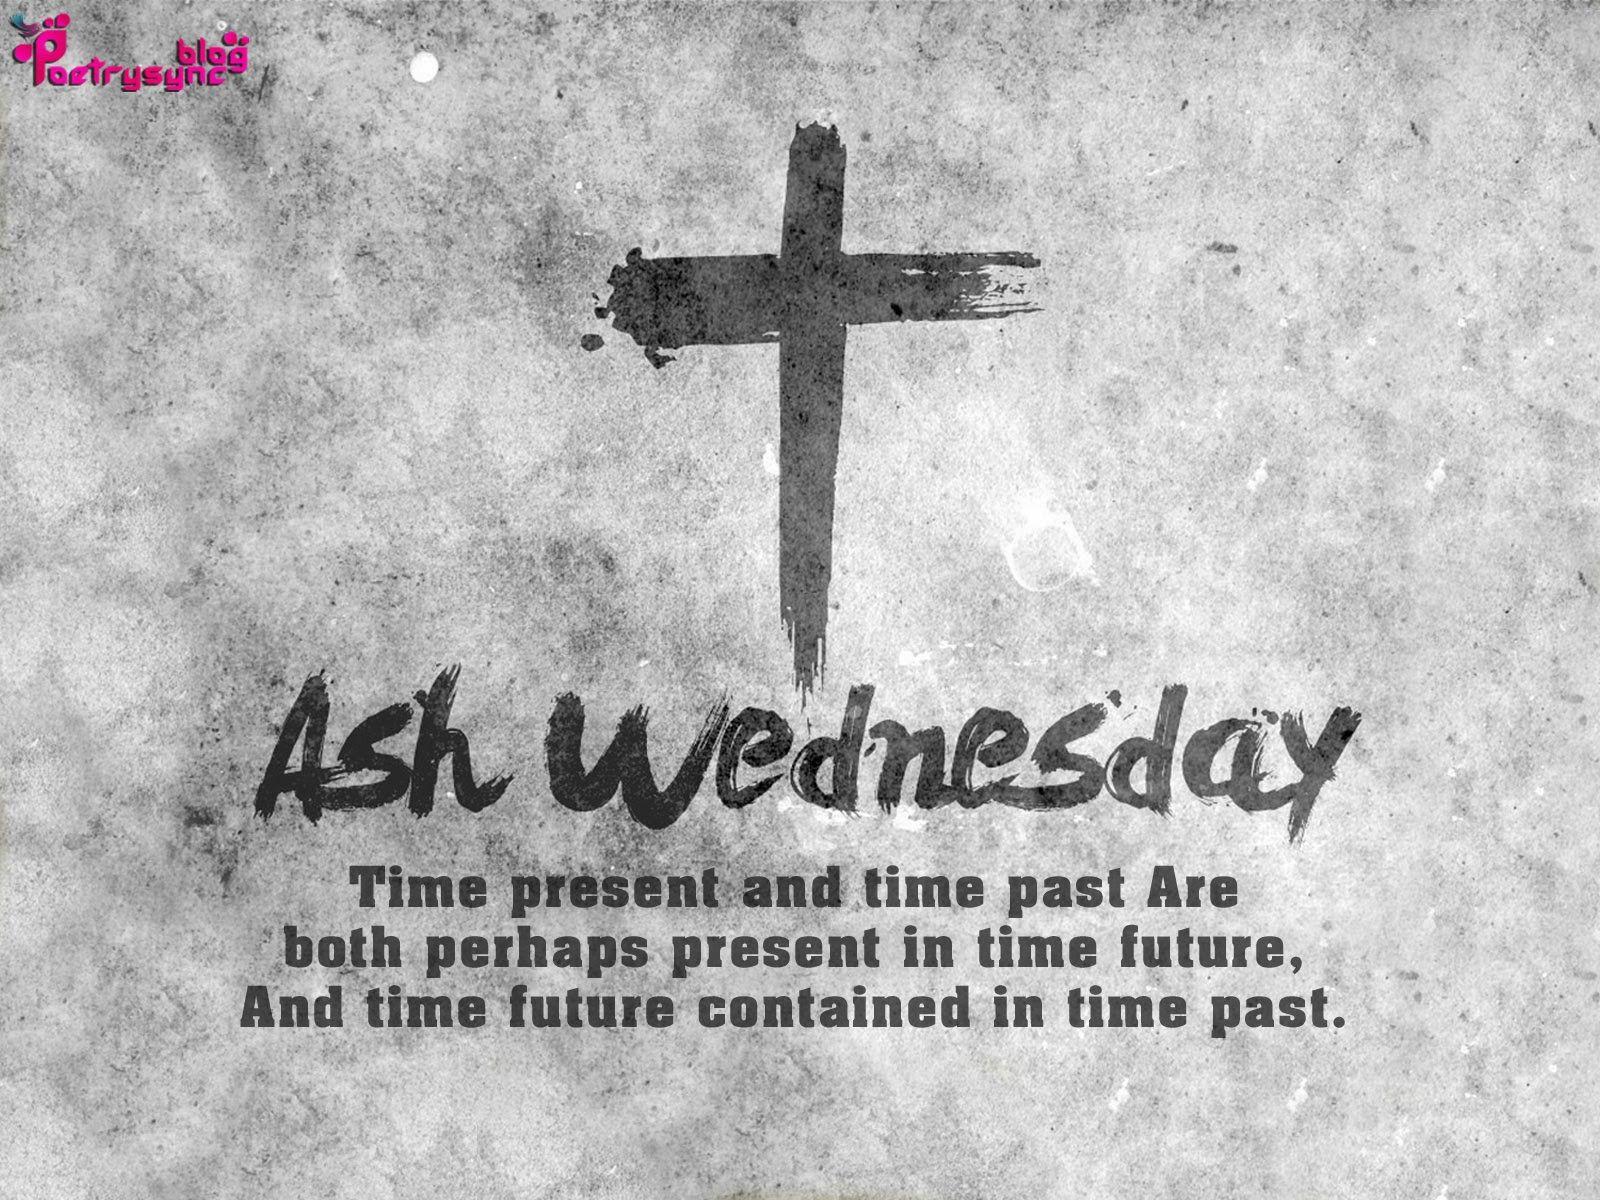 Ash Wednesday Wishes and Greetings Picture with Quote Saying. Ash